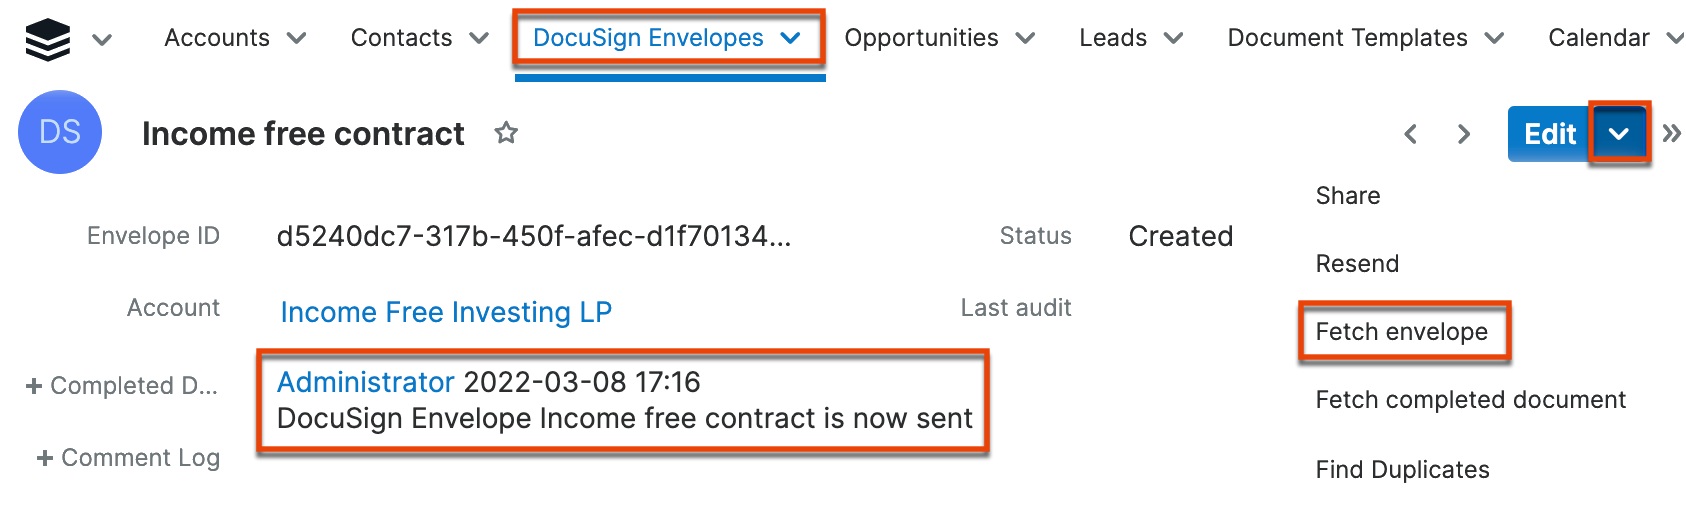 How do I manage my DocuSIgn contacts?